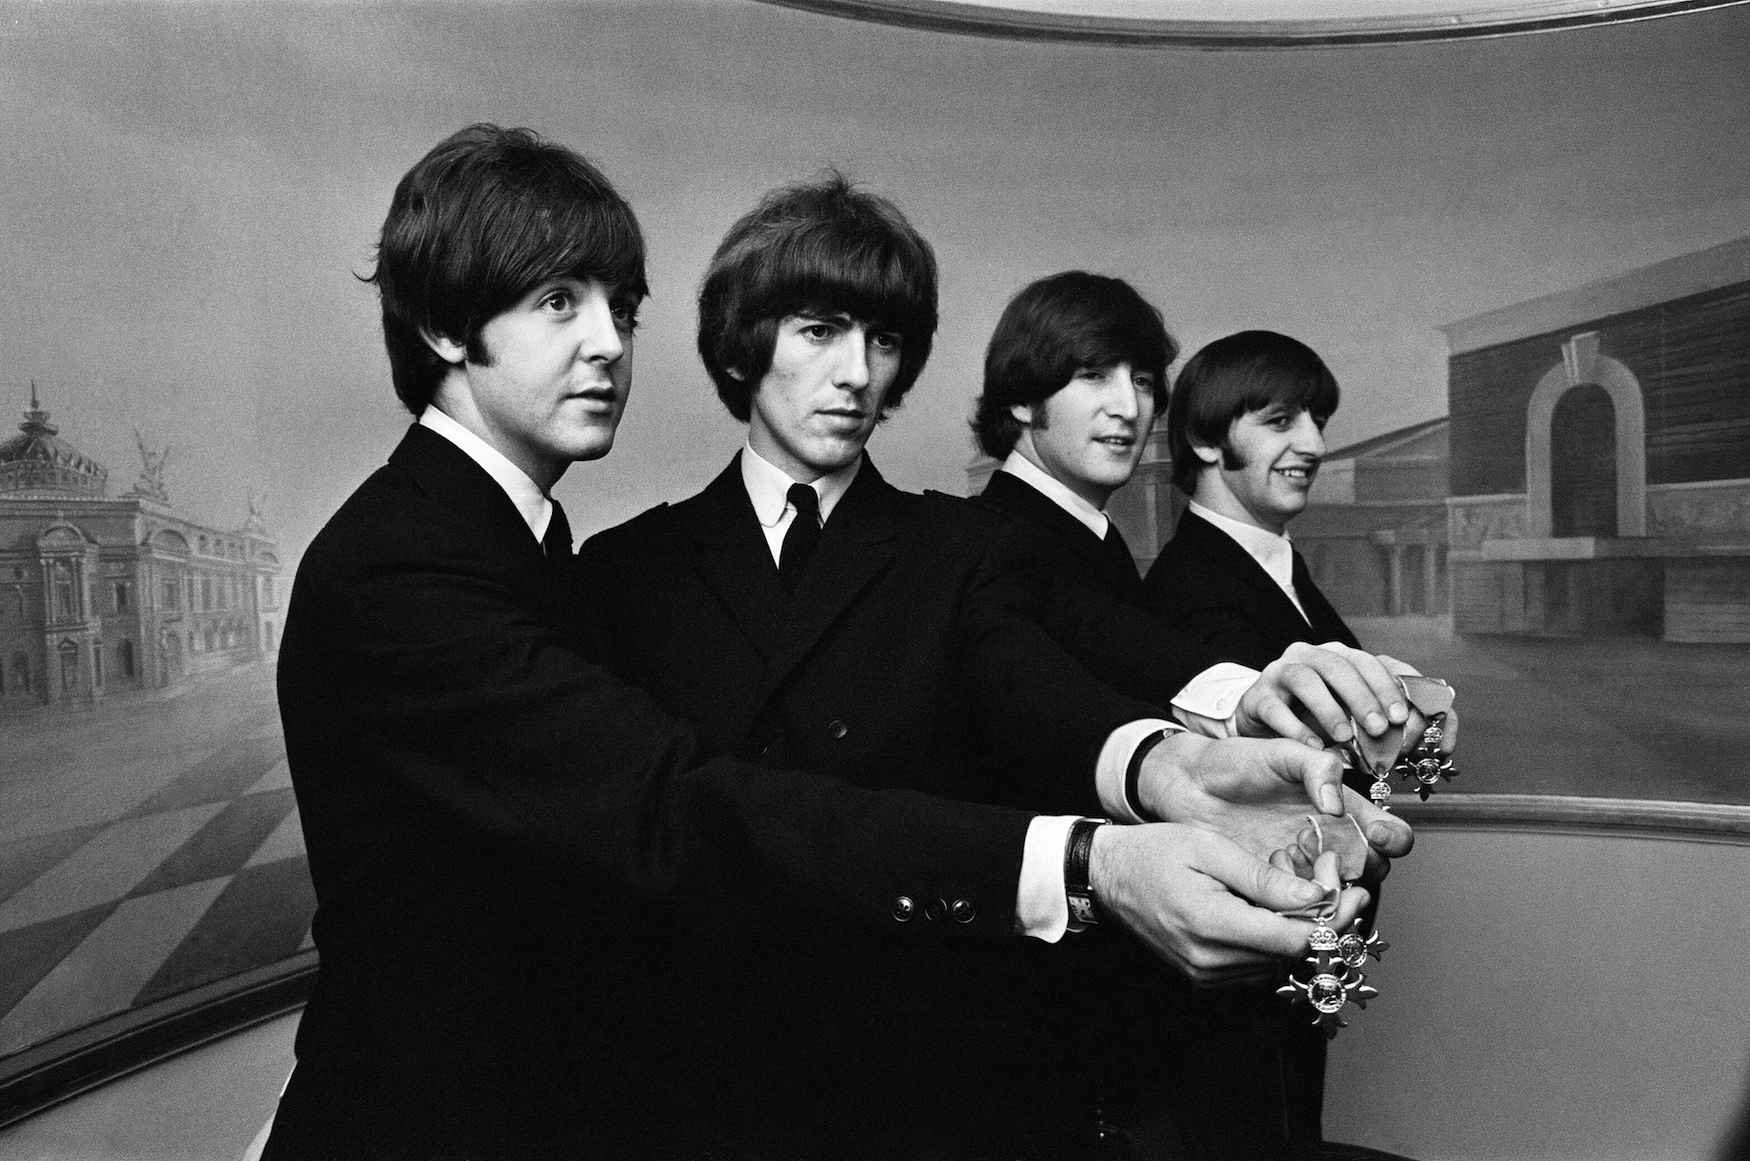 The Beatles show off their MBE medals after the royal investiture